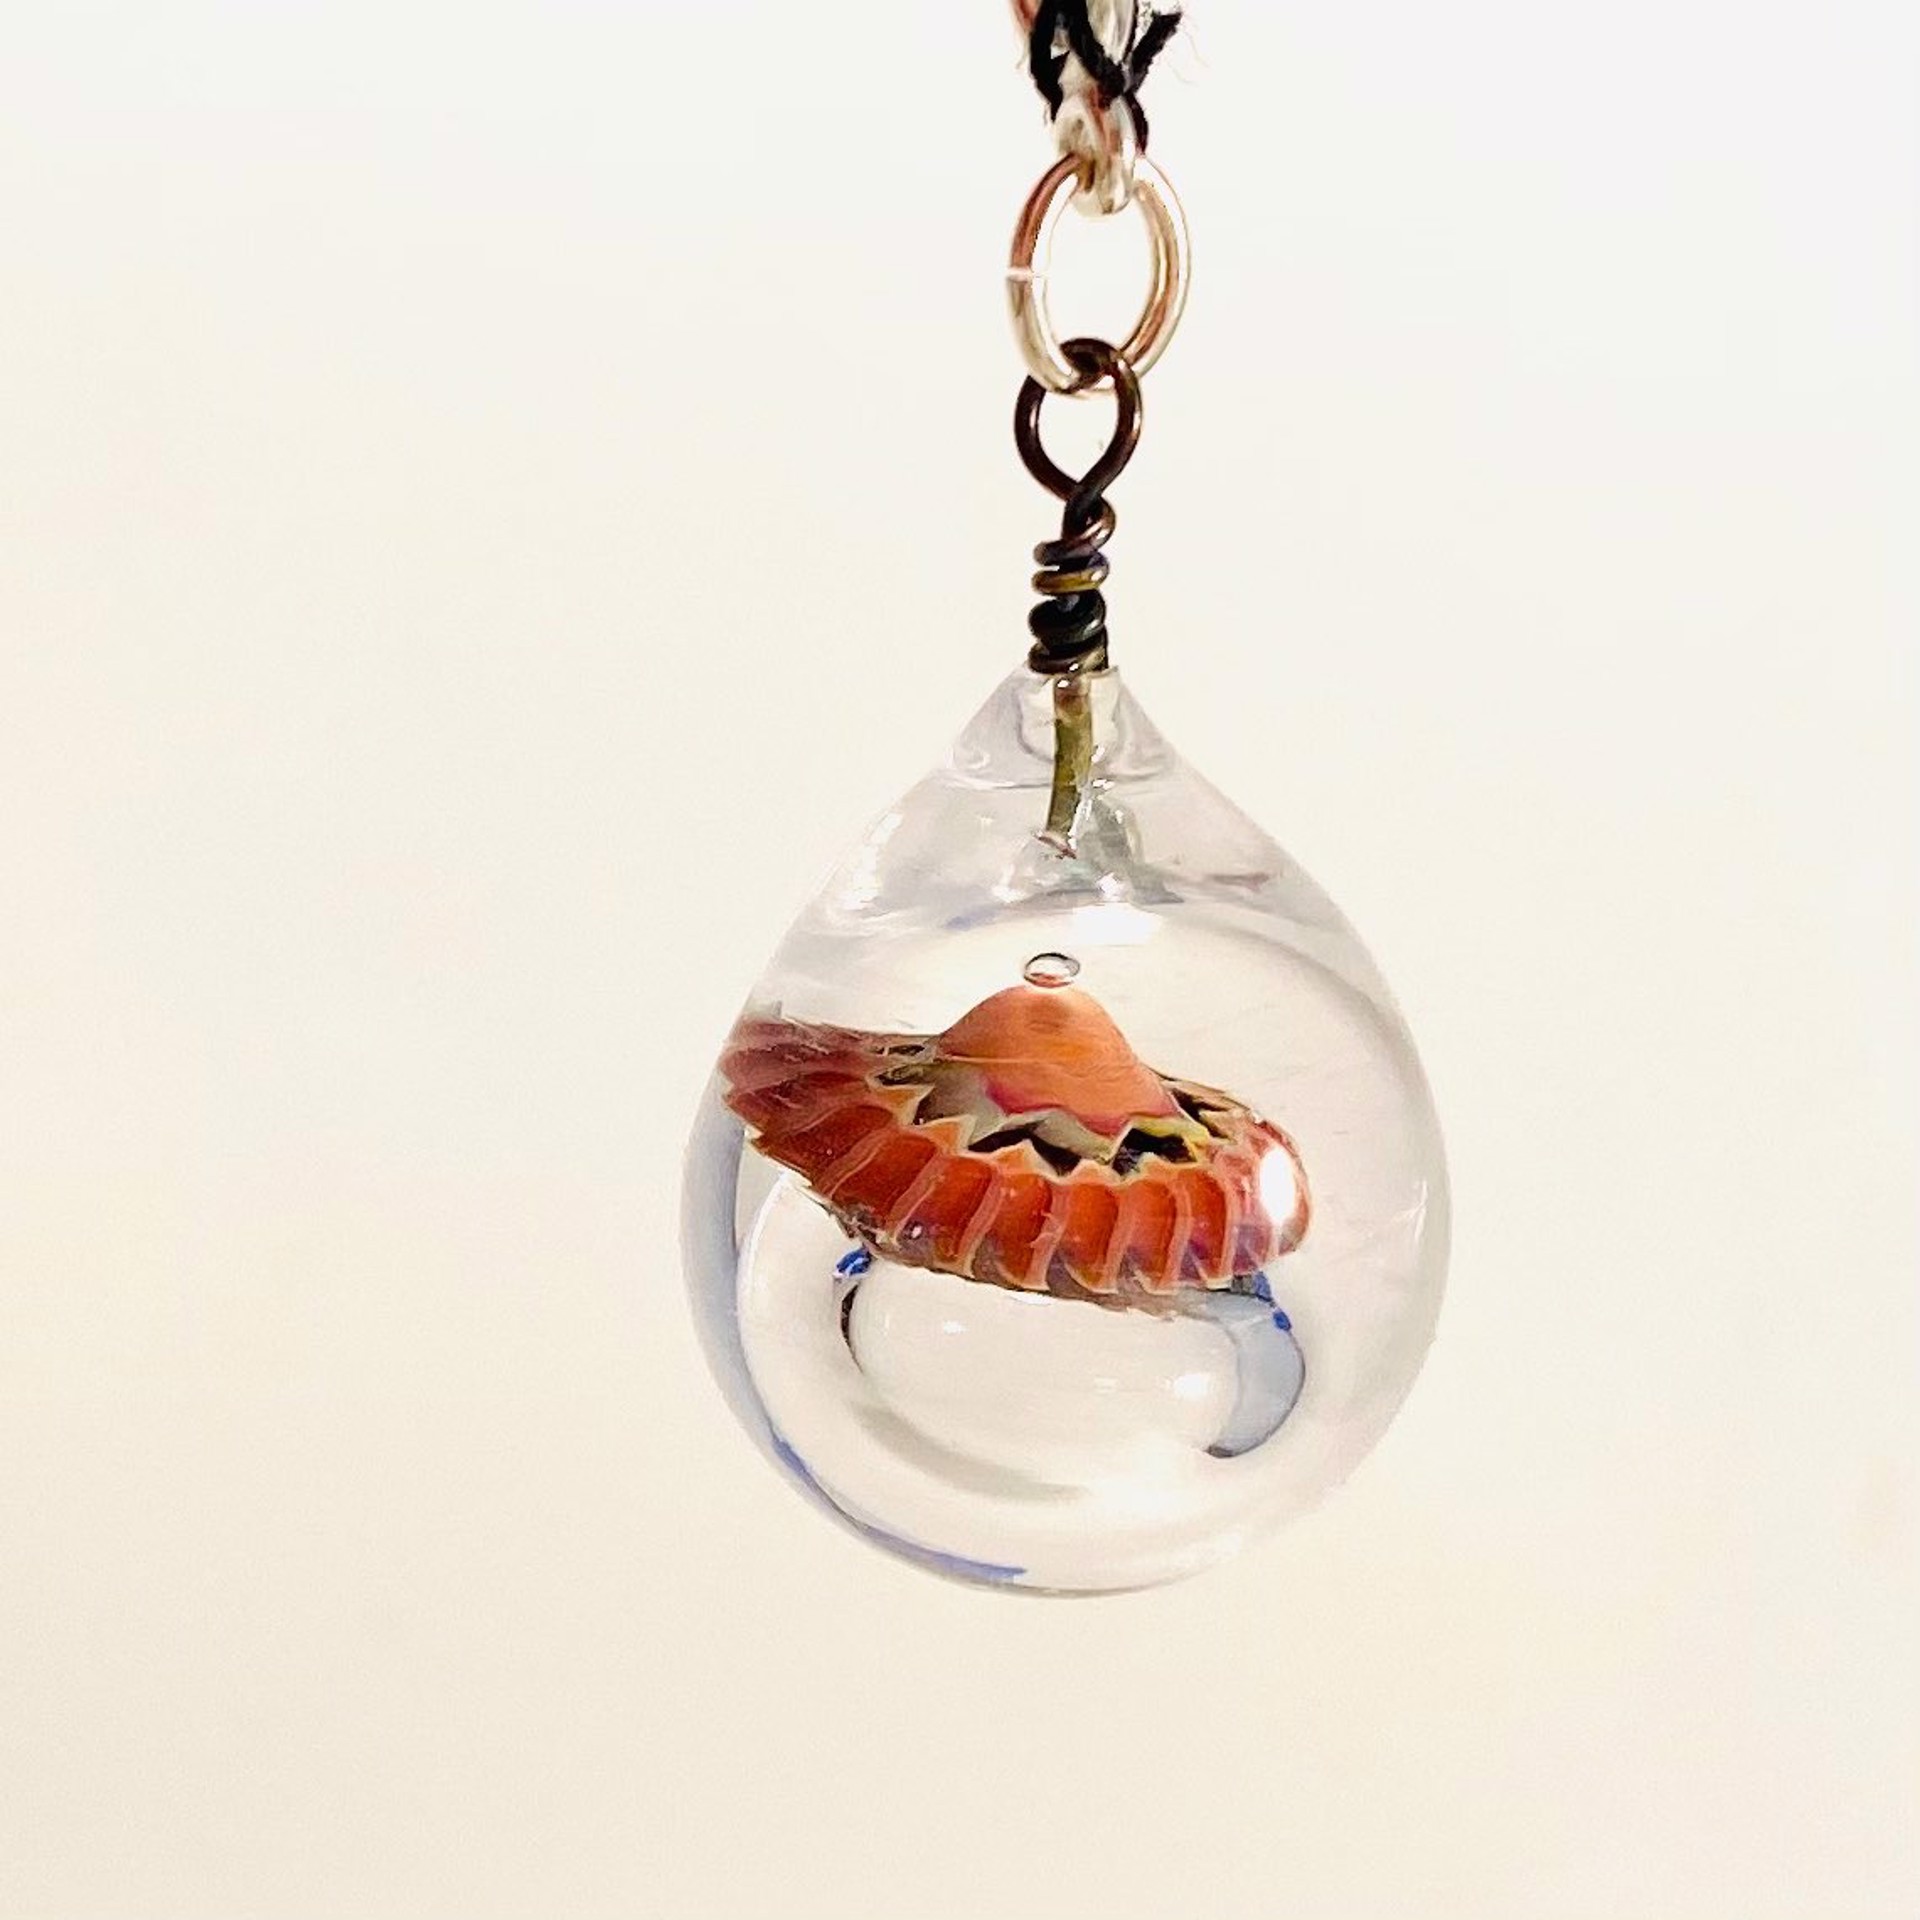 Clear Drop with Murrini Bubble Charm LS22-78 by Linda Sacra